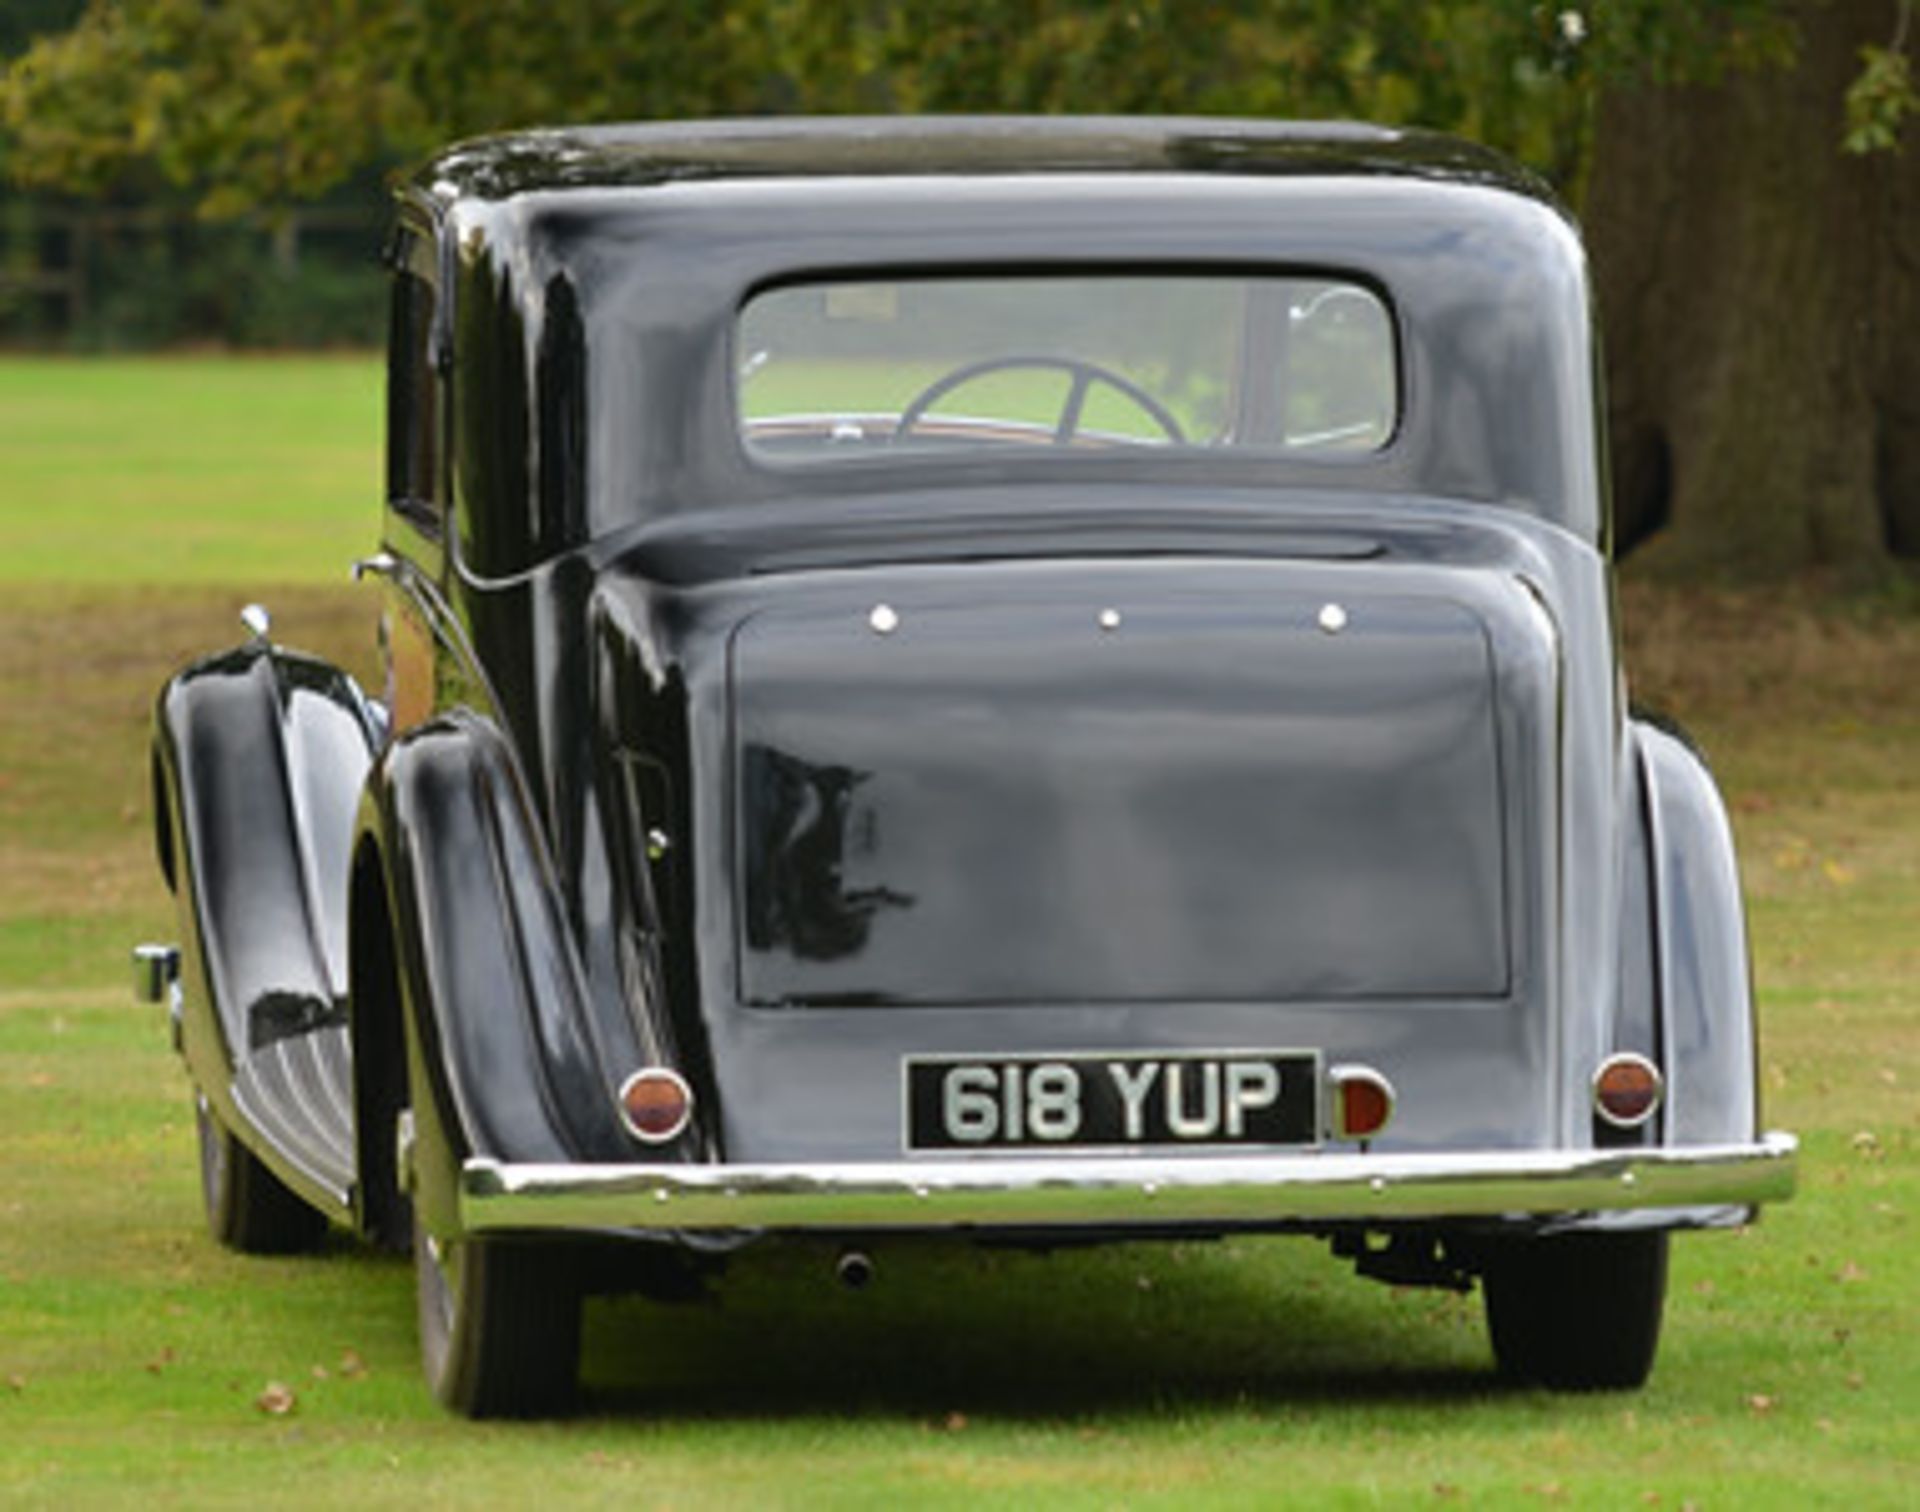 1937 Rolls Royce 25 / 30  James Young Sports Saloon
Chassis Number: GUL73Registration: 618 YUP A - Image 9 of 9